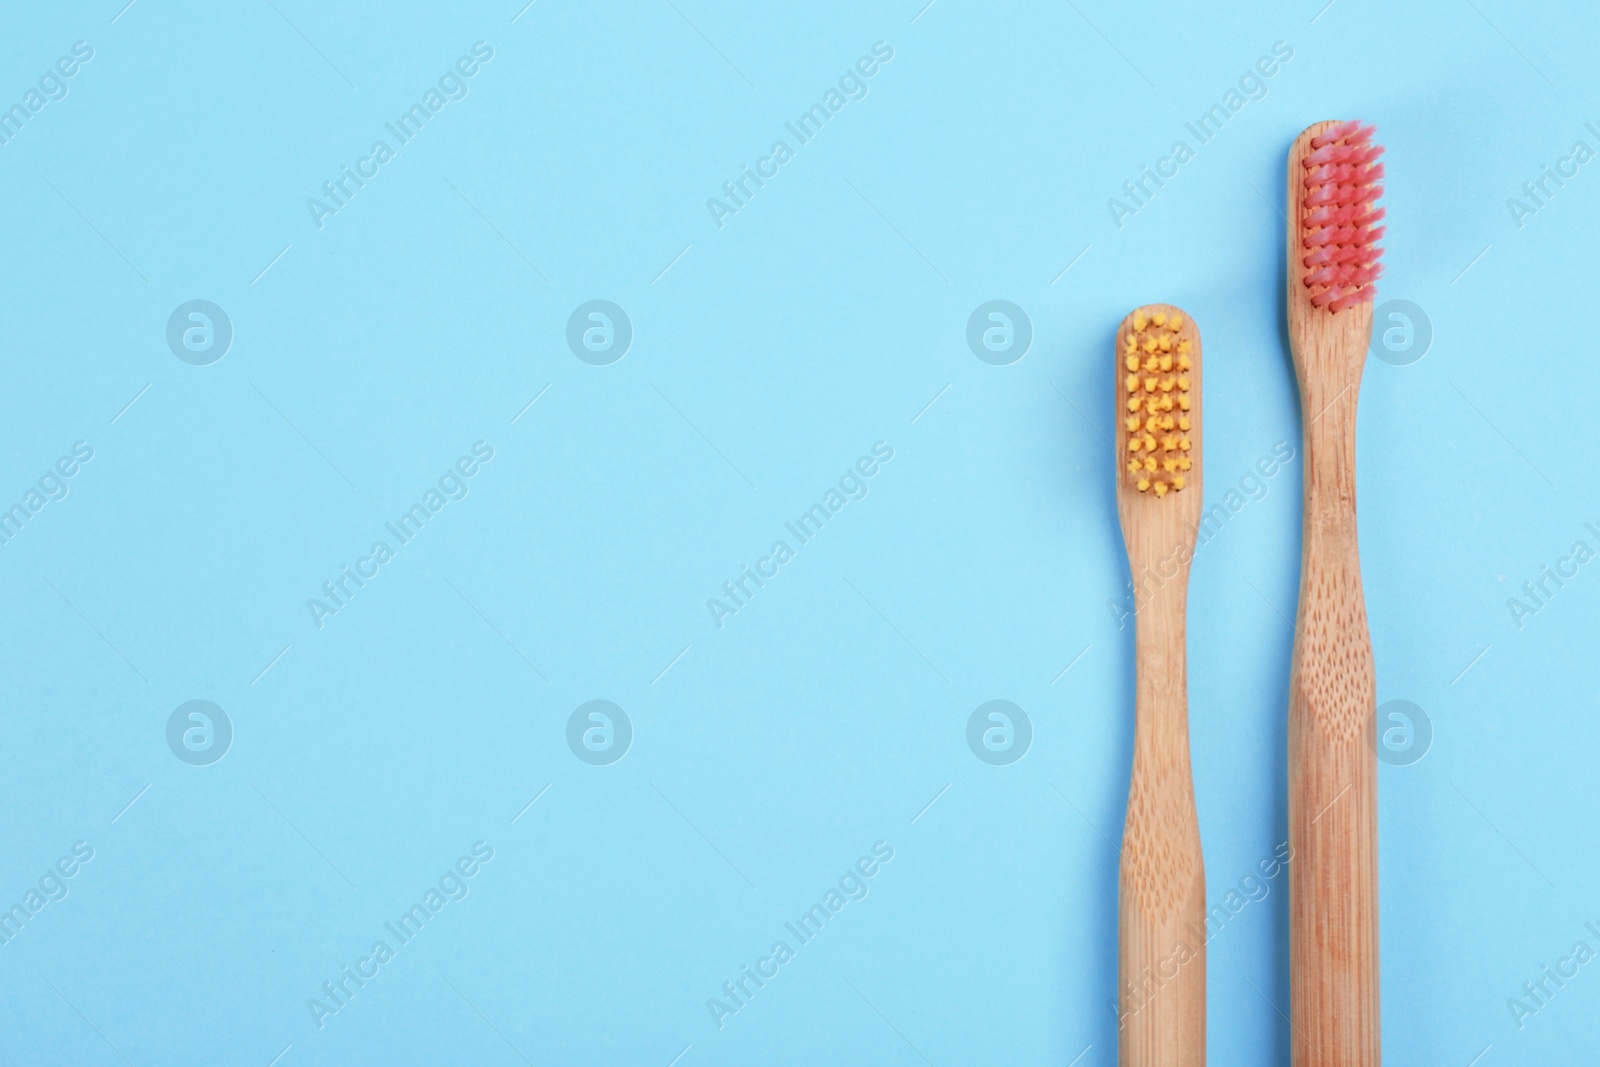 Photo of Toothbrushes made of bamboo on light blue background, flat lay. Space for text